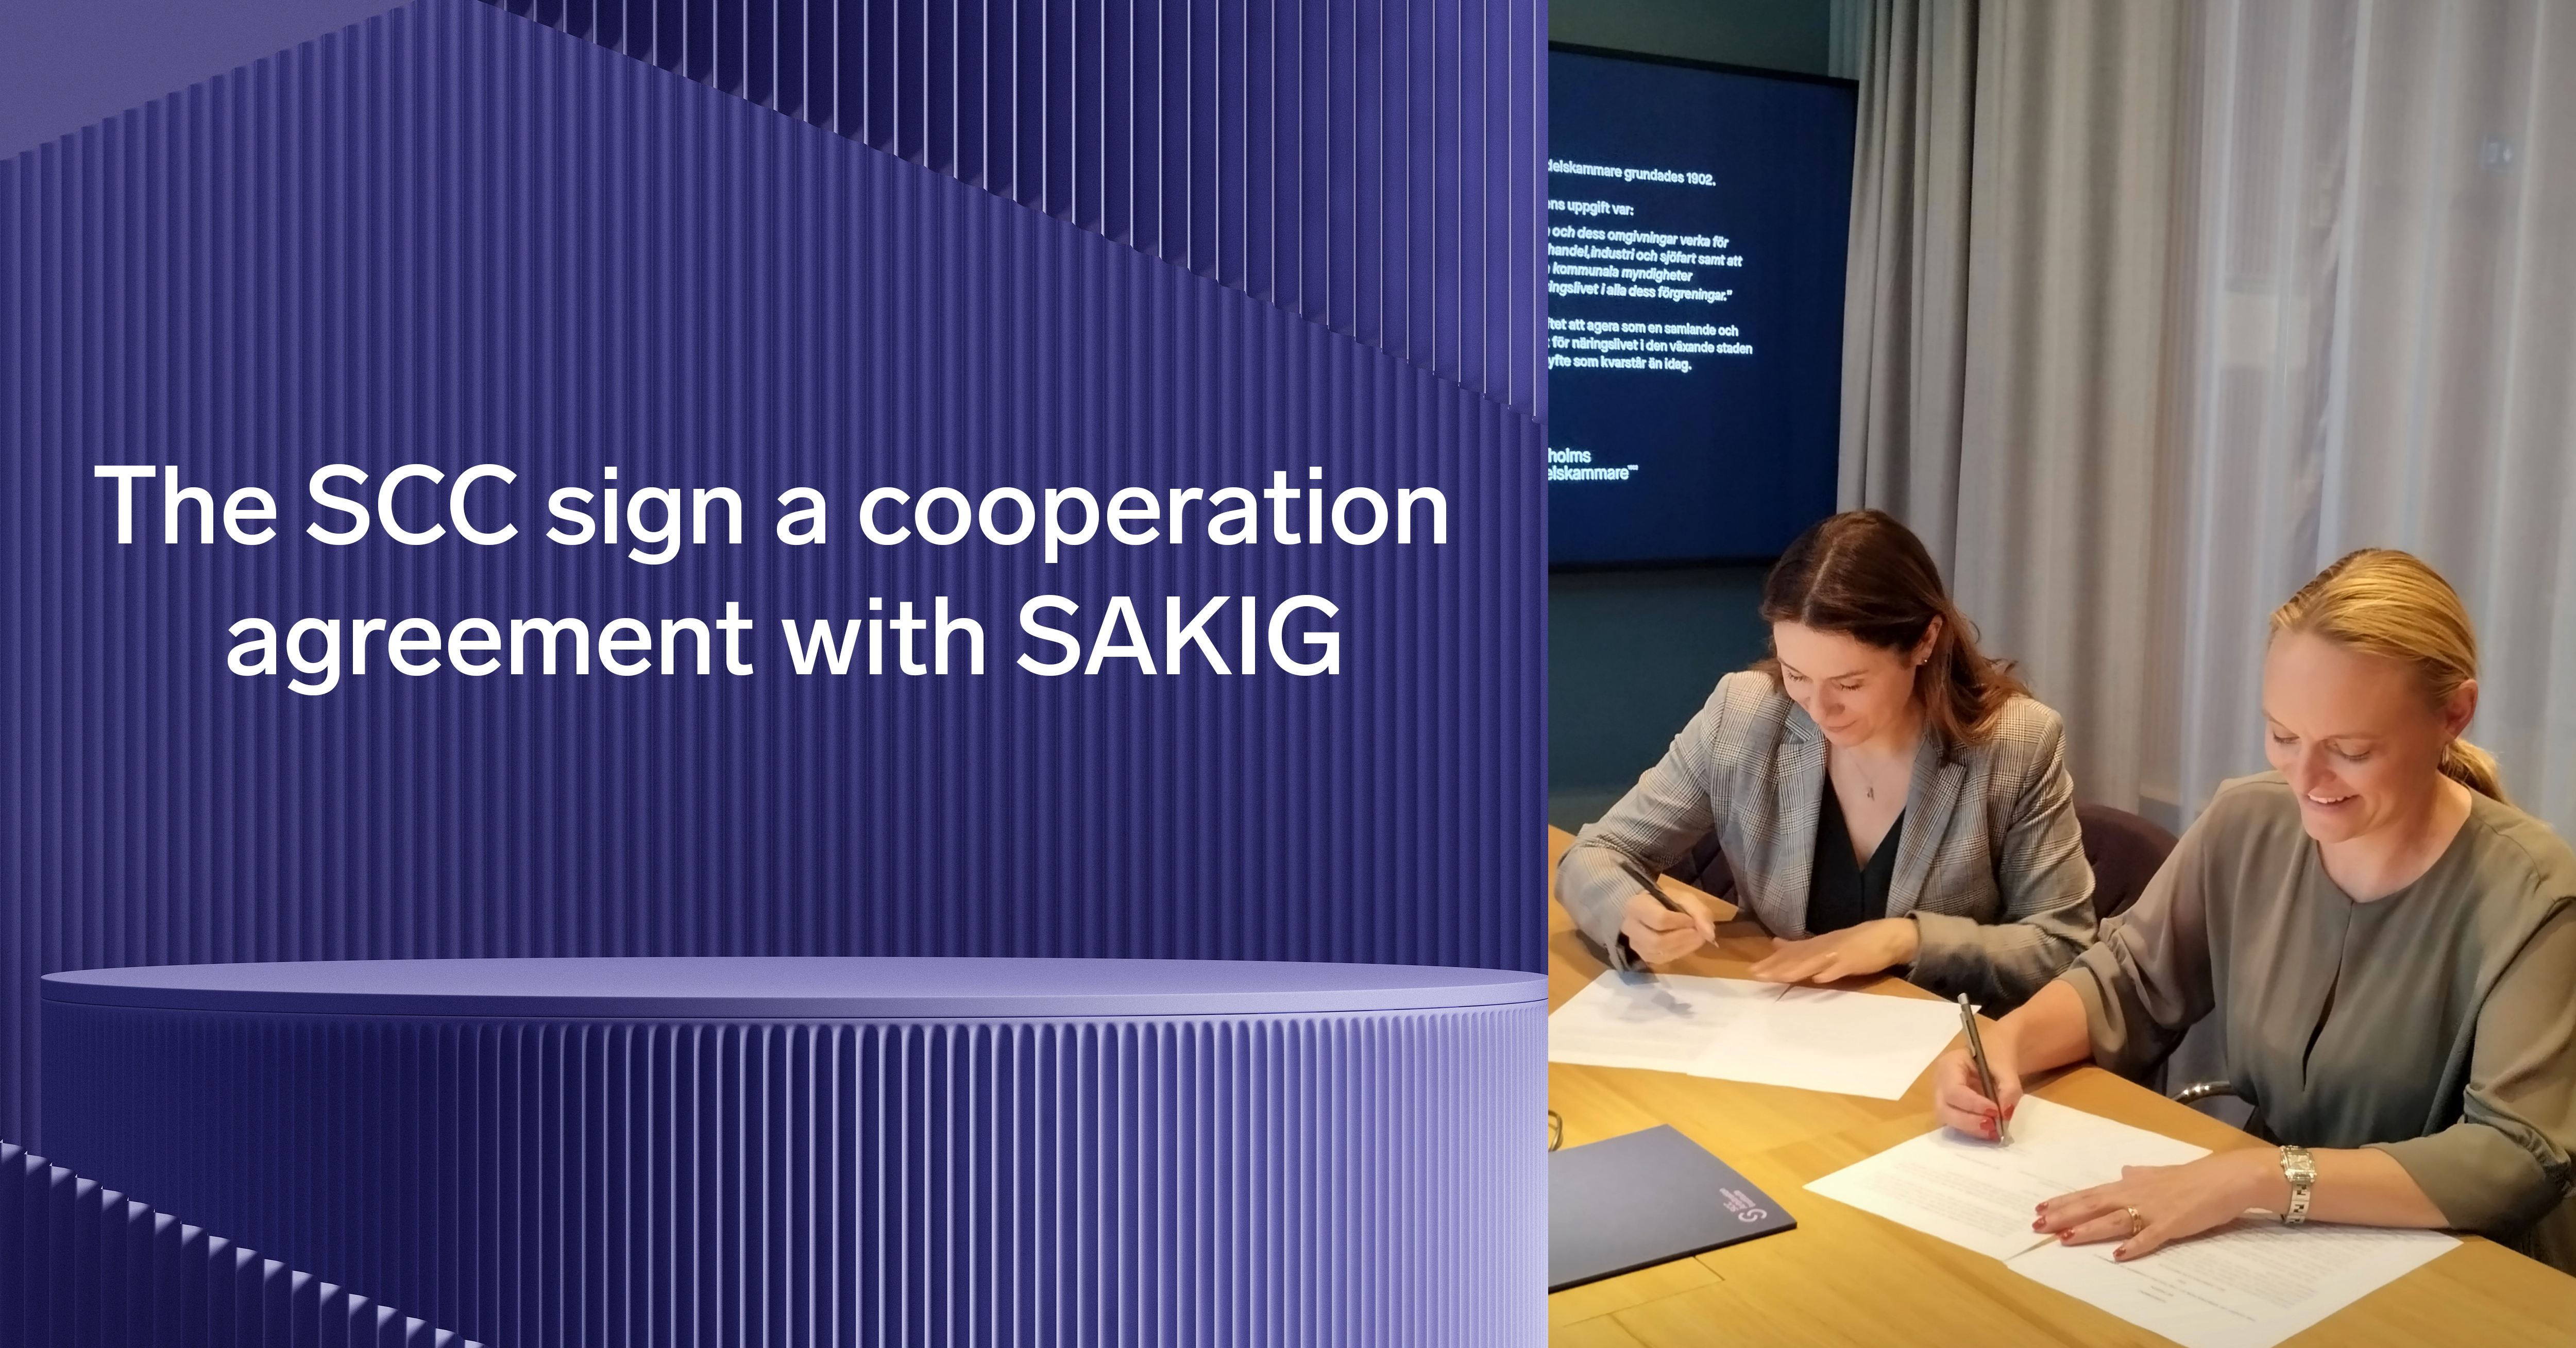 SCC and SAKIG cooperation agreement